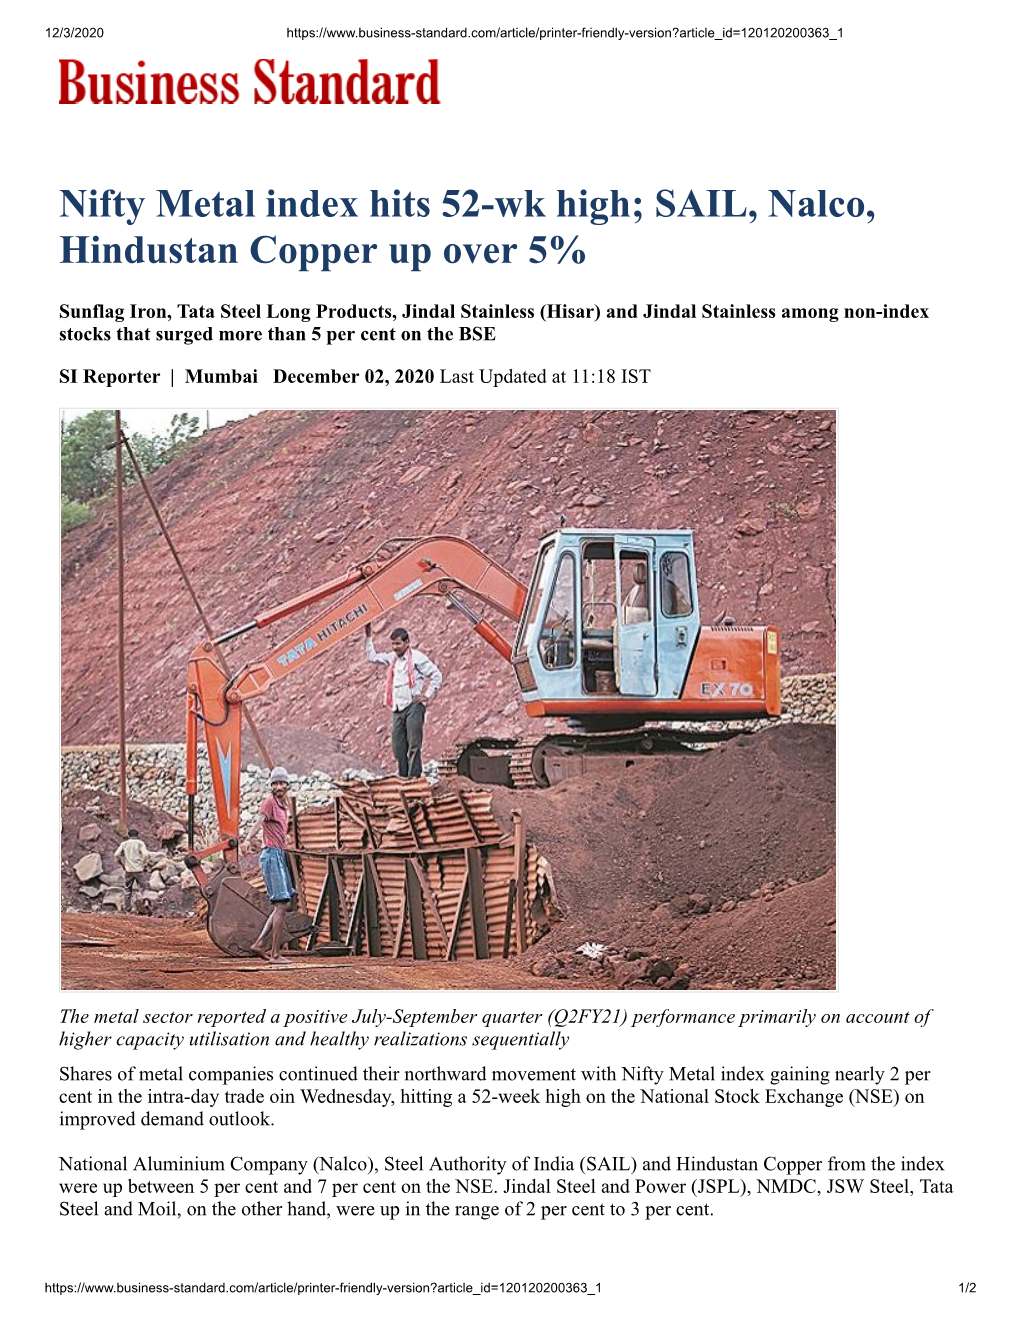 Nifty Metal Index Hits 52-Wk High; SAIL, Nalco, Hindustan Copper up Over 5%